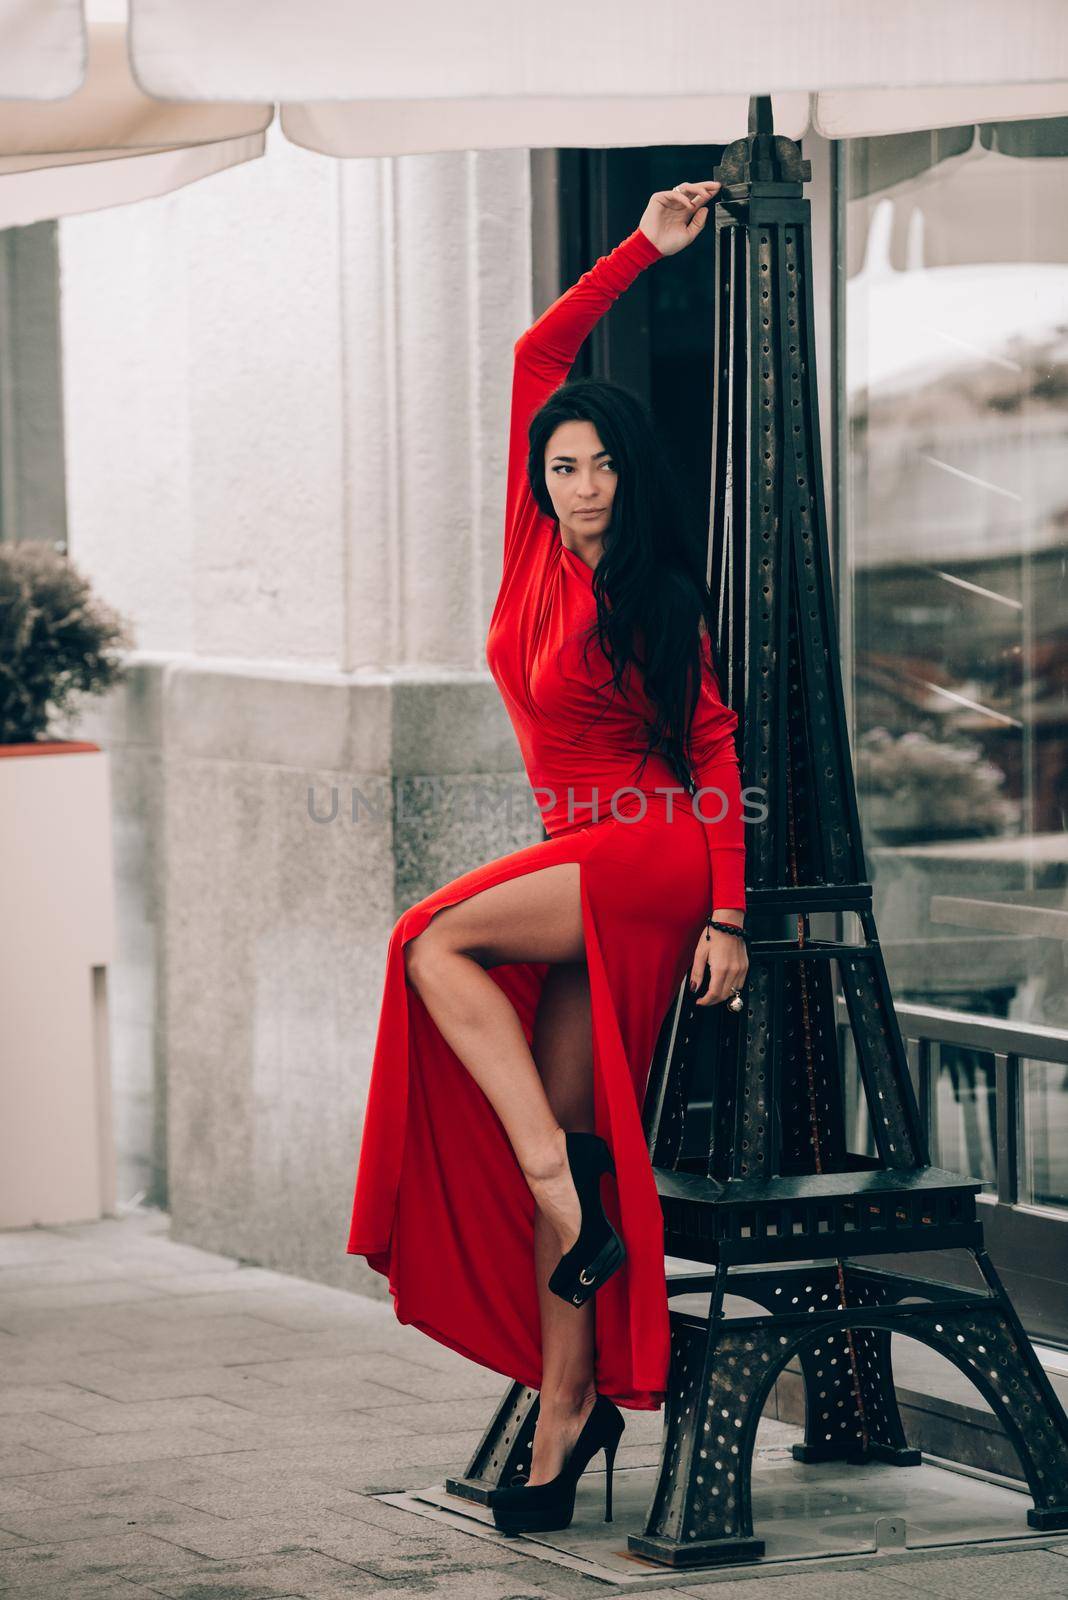 Charming young woman in red sexy dress posing . photo of a seductive woman with black hair near decorative tower. Selective focus, filmgrain by Ashtray25